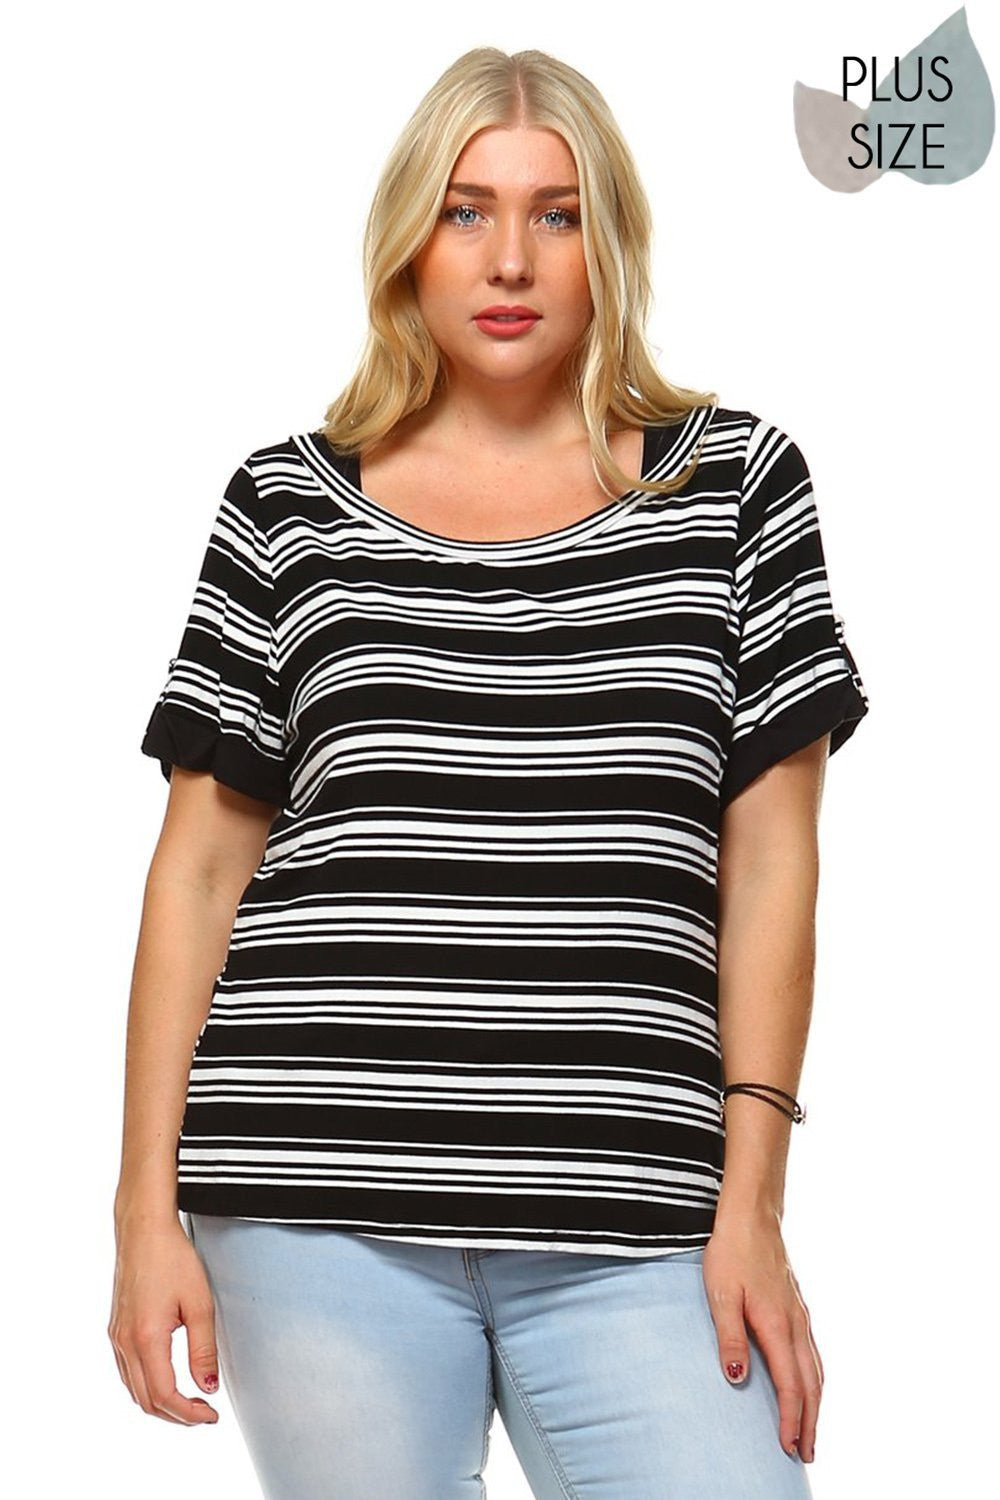 beautiful woman wearing a black and white Plus Size Striped Scoop neck Boyfriend tee with Fold-over sleeve and button detail Perfect during spring, summer,Concerts, Festivals, Dance, Brunch, Shopping, Weekend Getaway,Evening wear, Beach Day, Vacation, Dance, Poolside Parties,Casual day